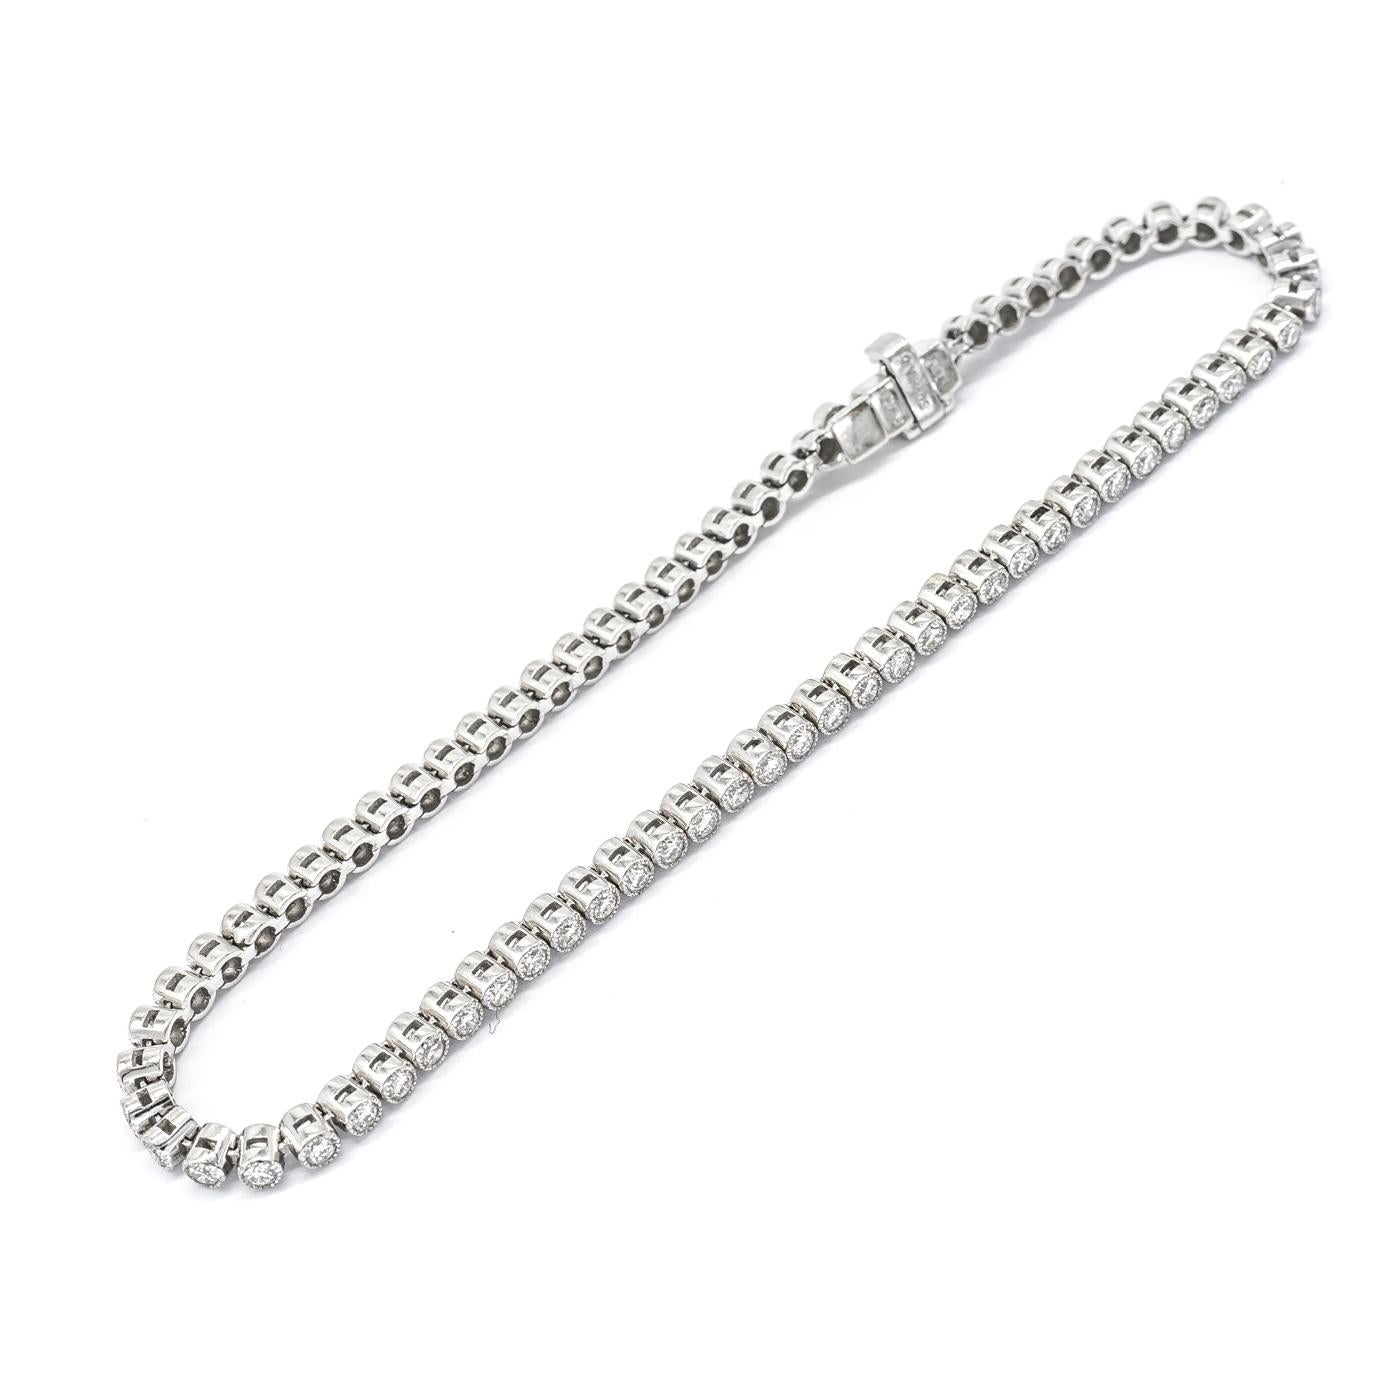 Diamond line bracelet, set with round brilliant-cut diamonds in millegrain edged rub over settings. Mounted in platinum. Estimated total diamond weight 1.85ct. 